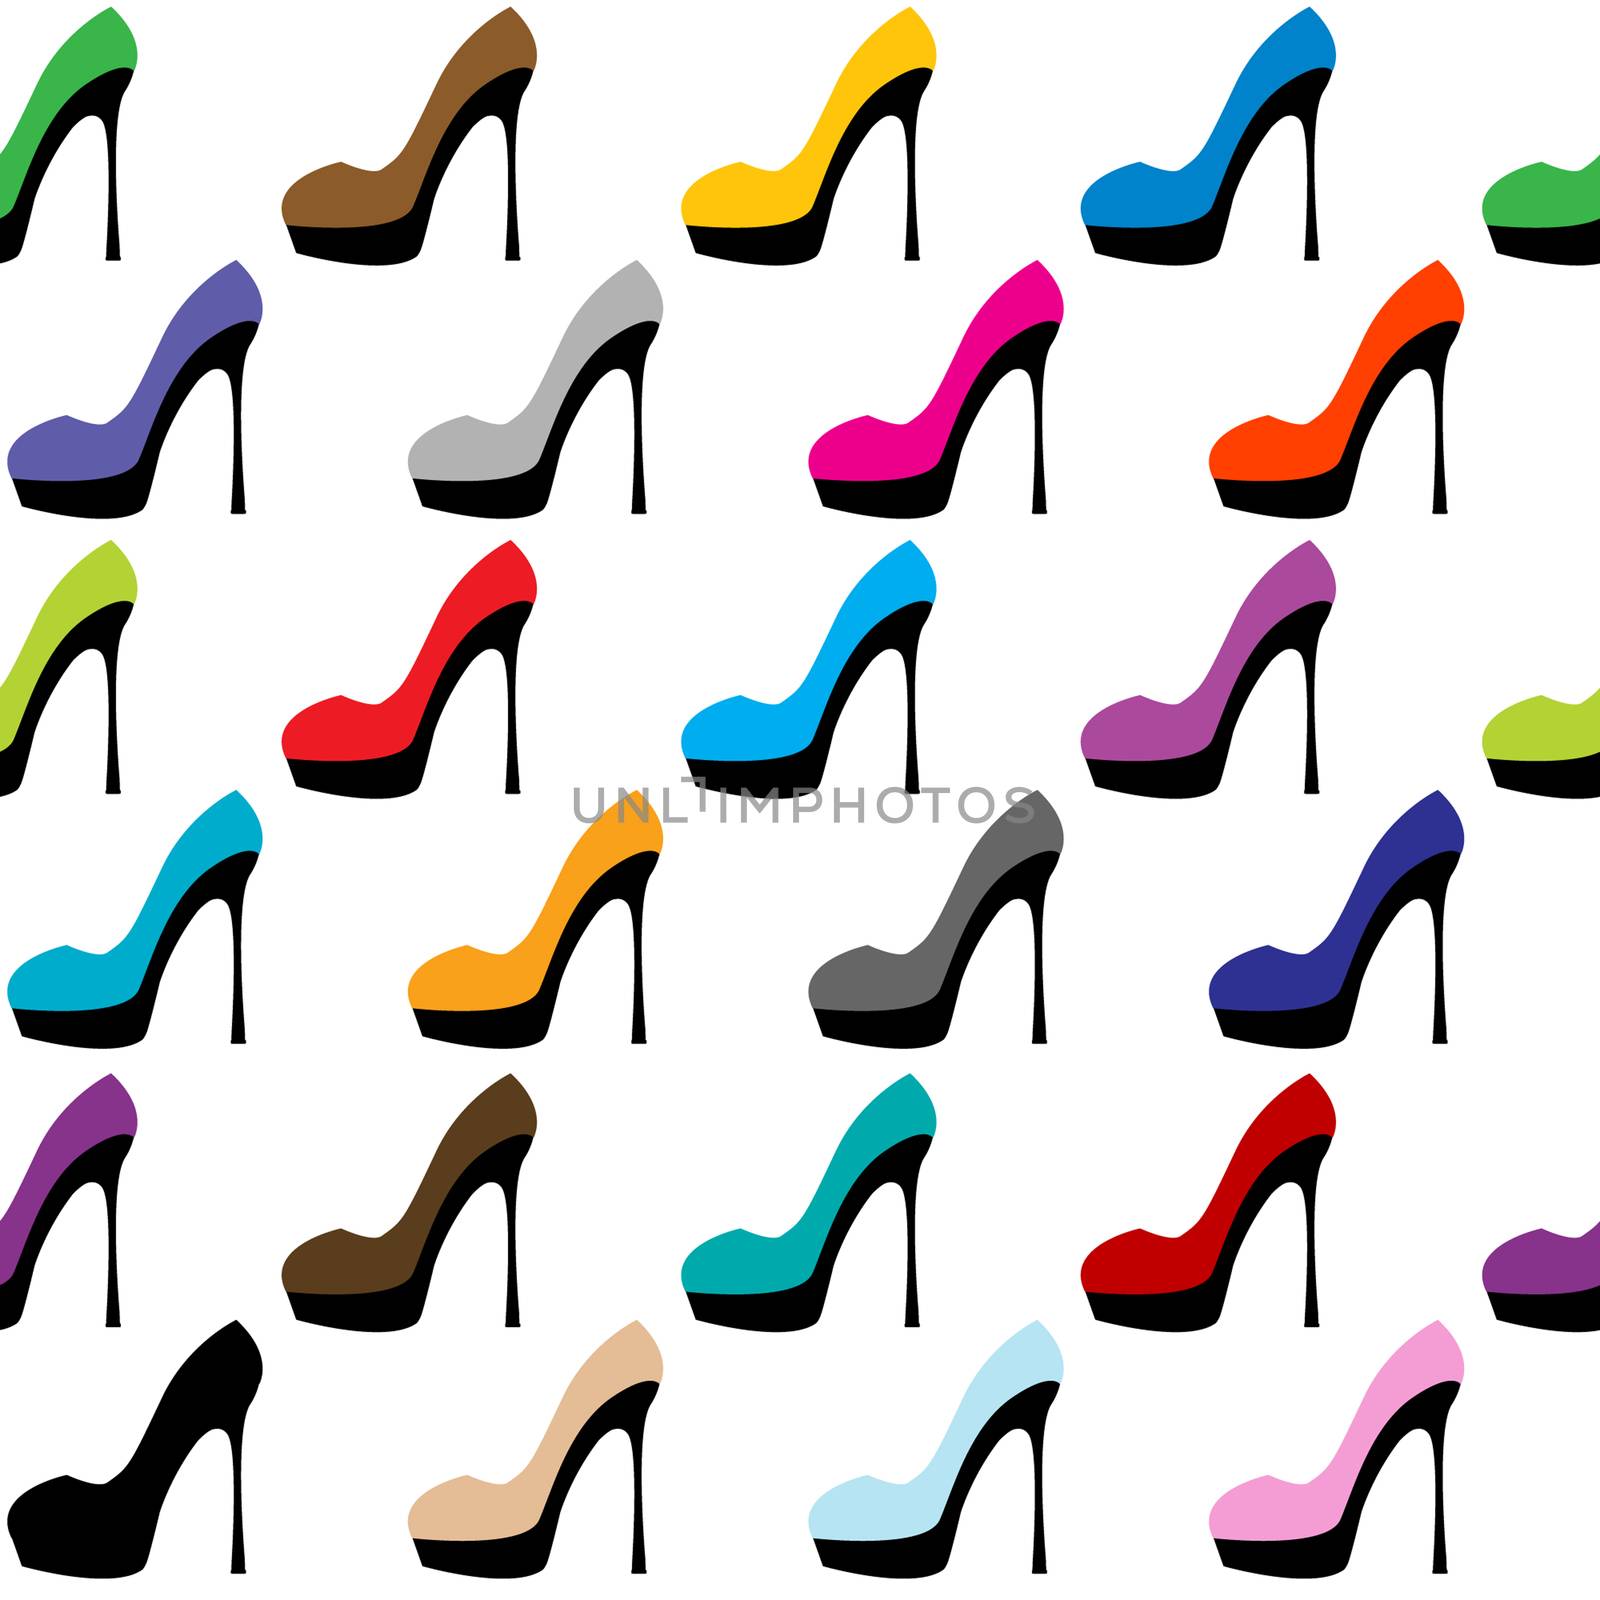 Colorful shoes with high heels seamless background by hibrida13